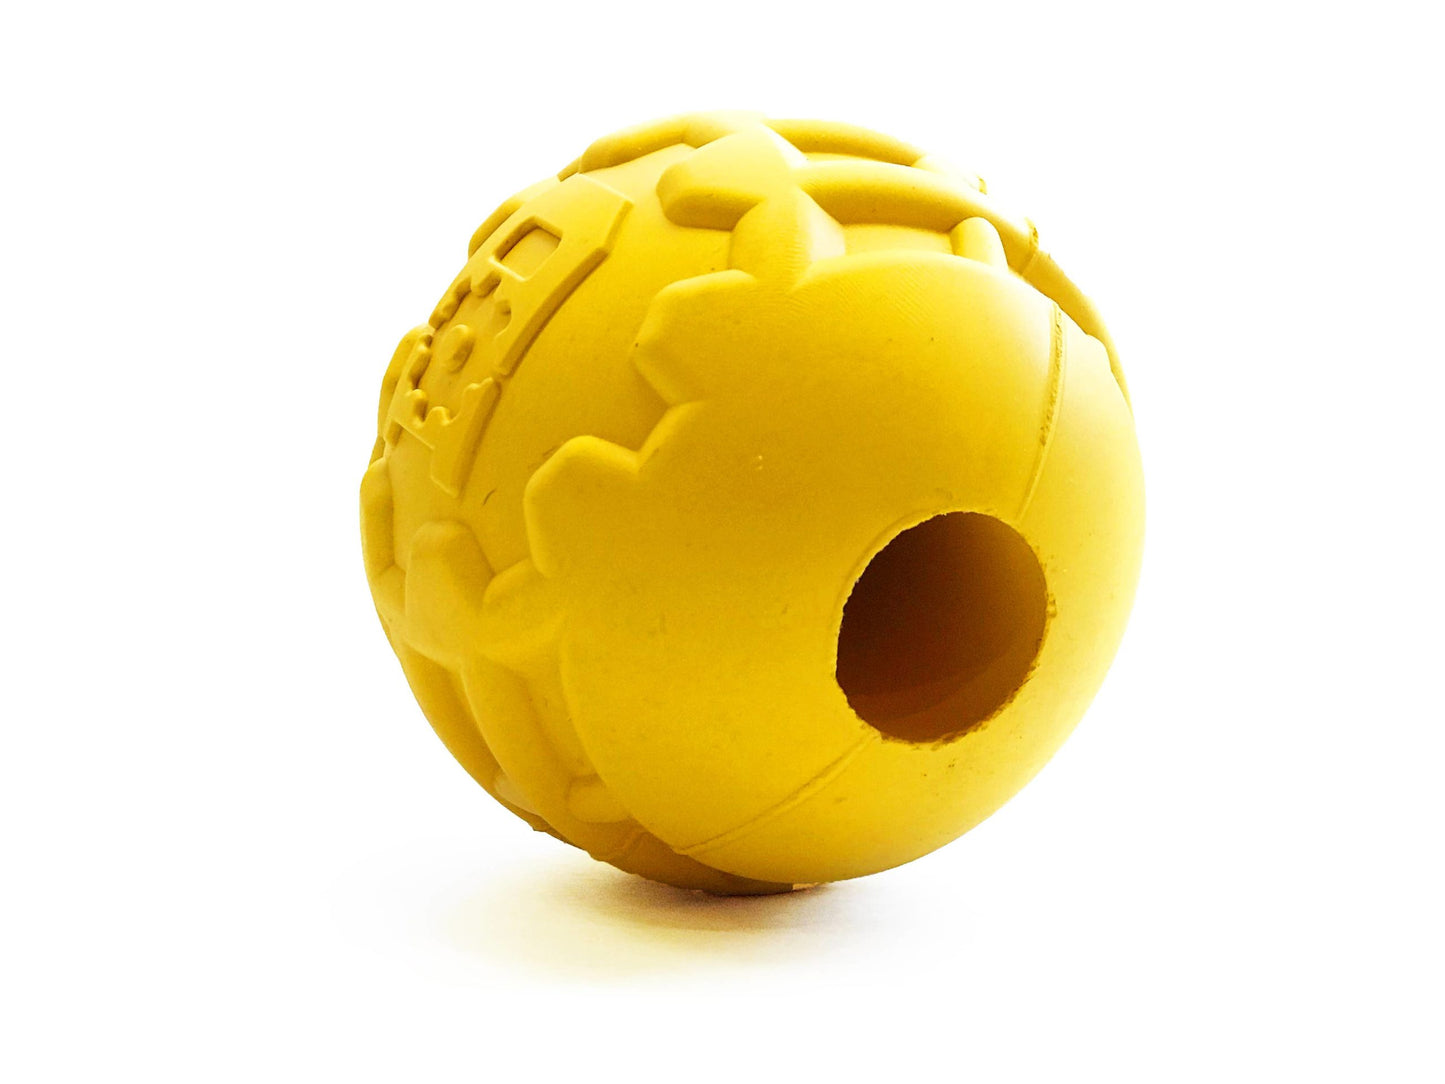 ID Gear Ball - Chew Toy - Retrieving Toy - Large - YellowID Gear Ball - Chew Toy - Retrieving Toy - Large - Yellow